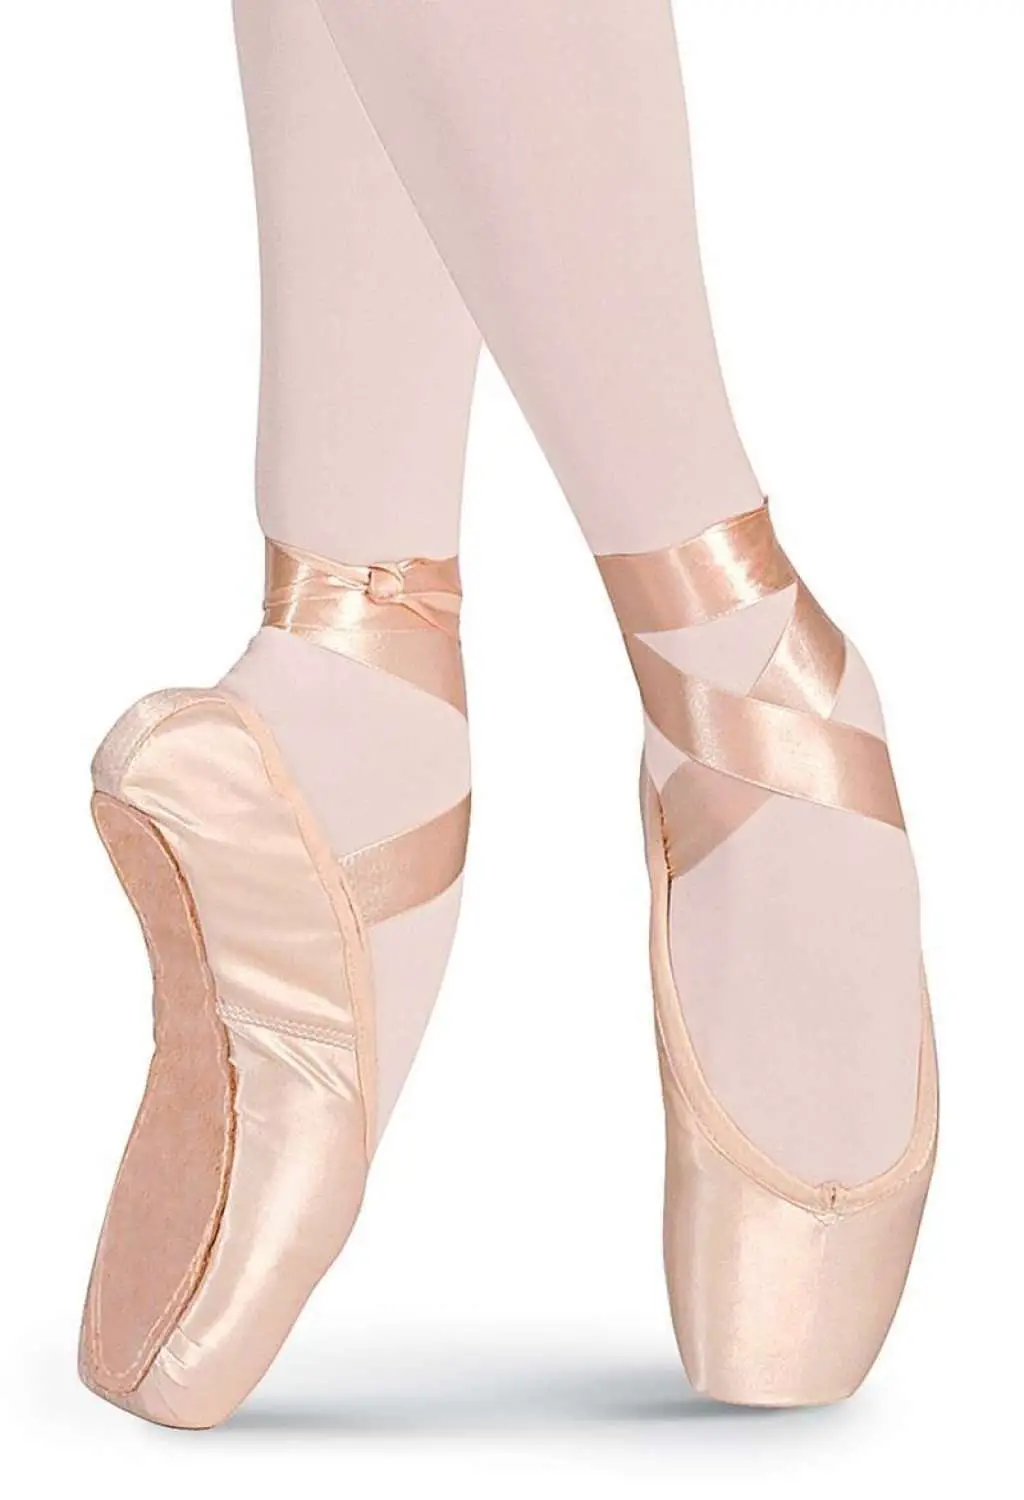 Which Are The Best Pointe Shoe Toe Pads?